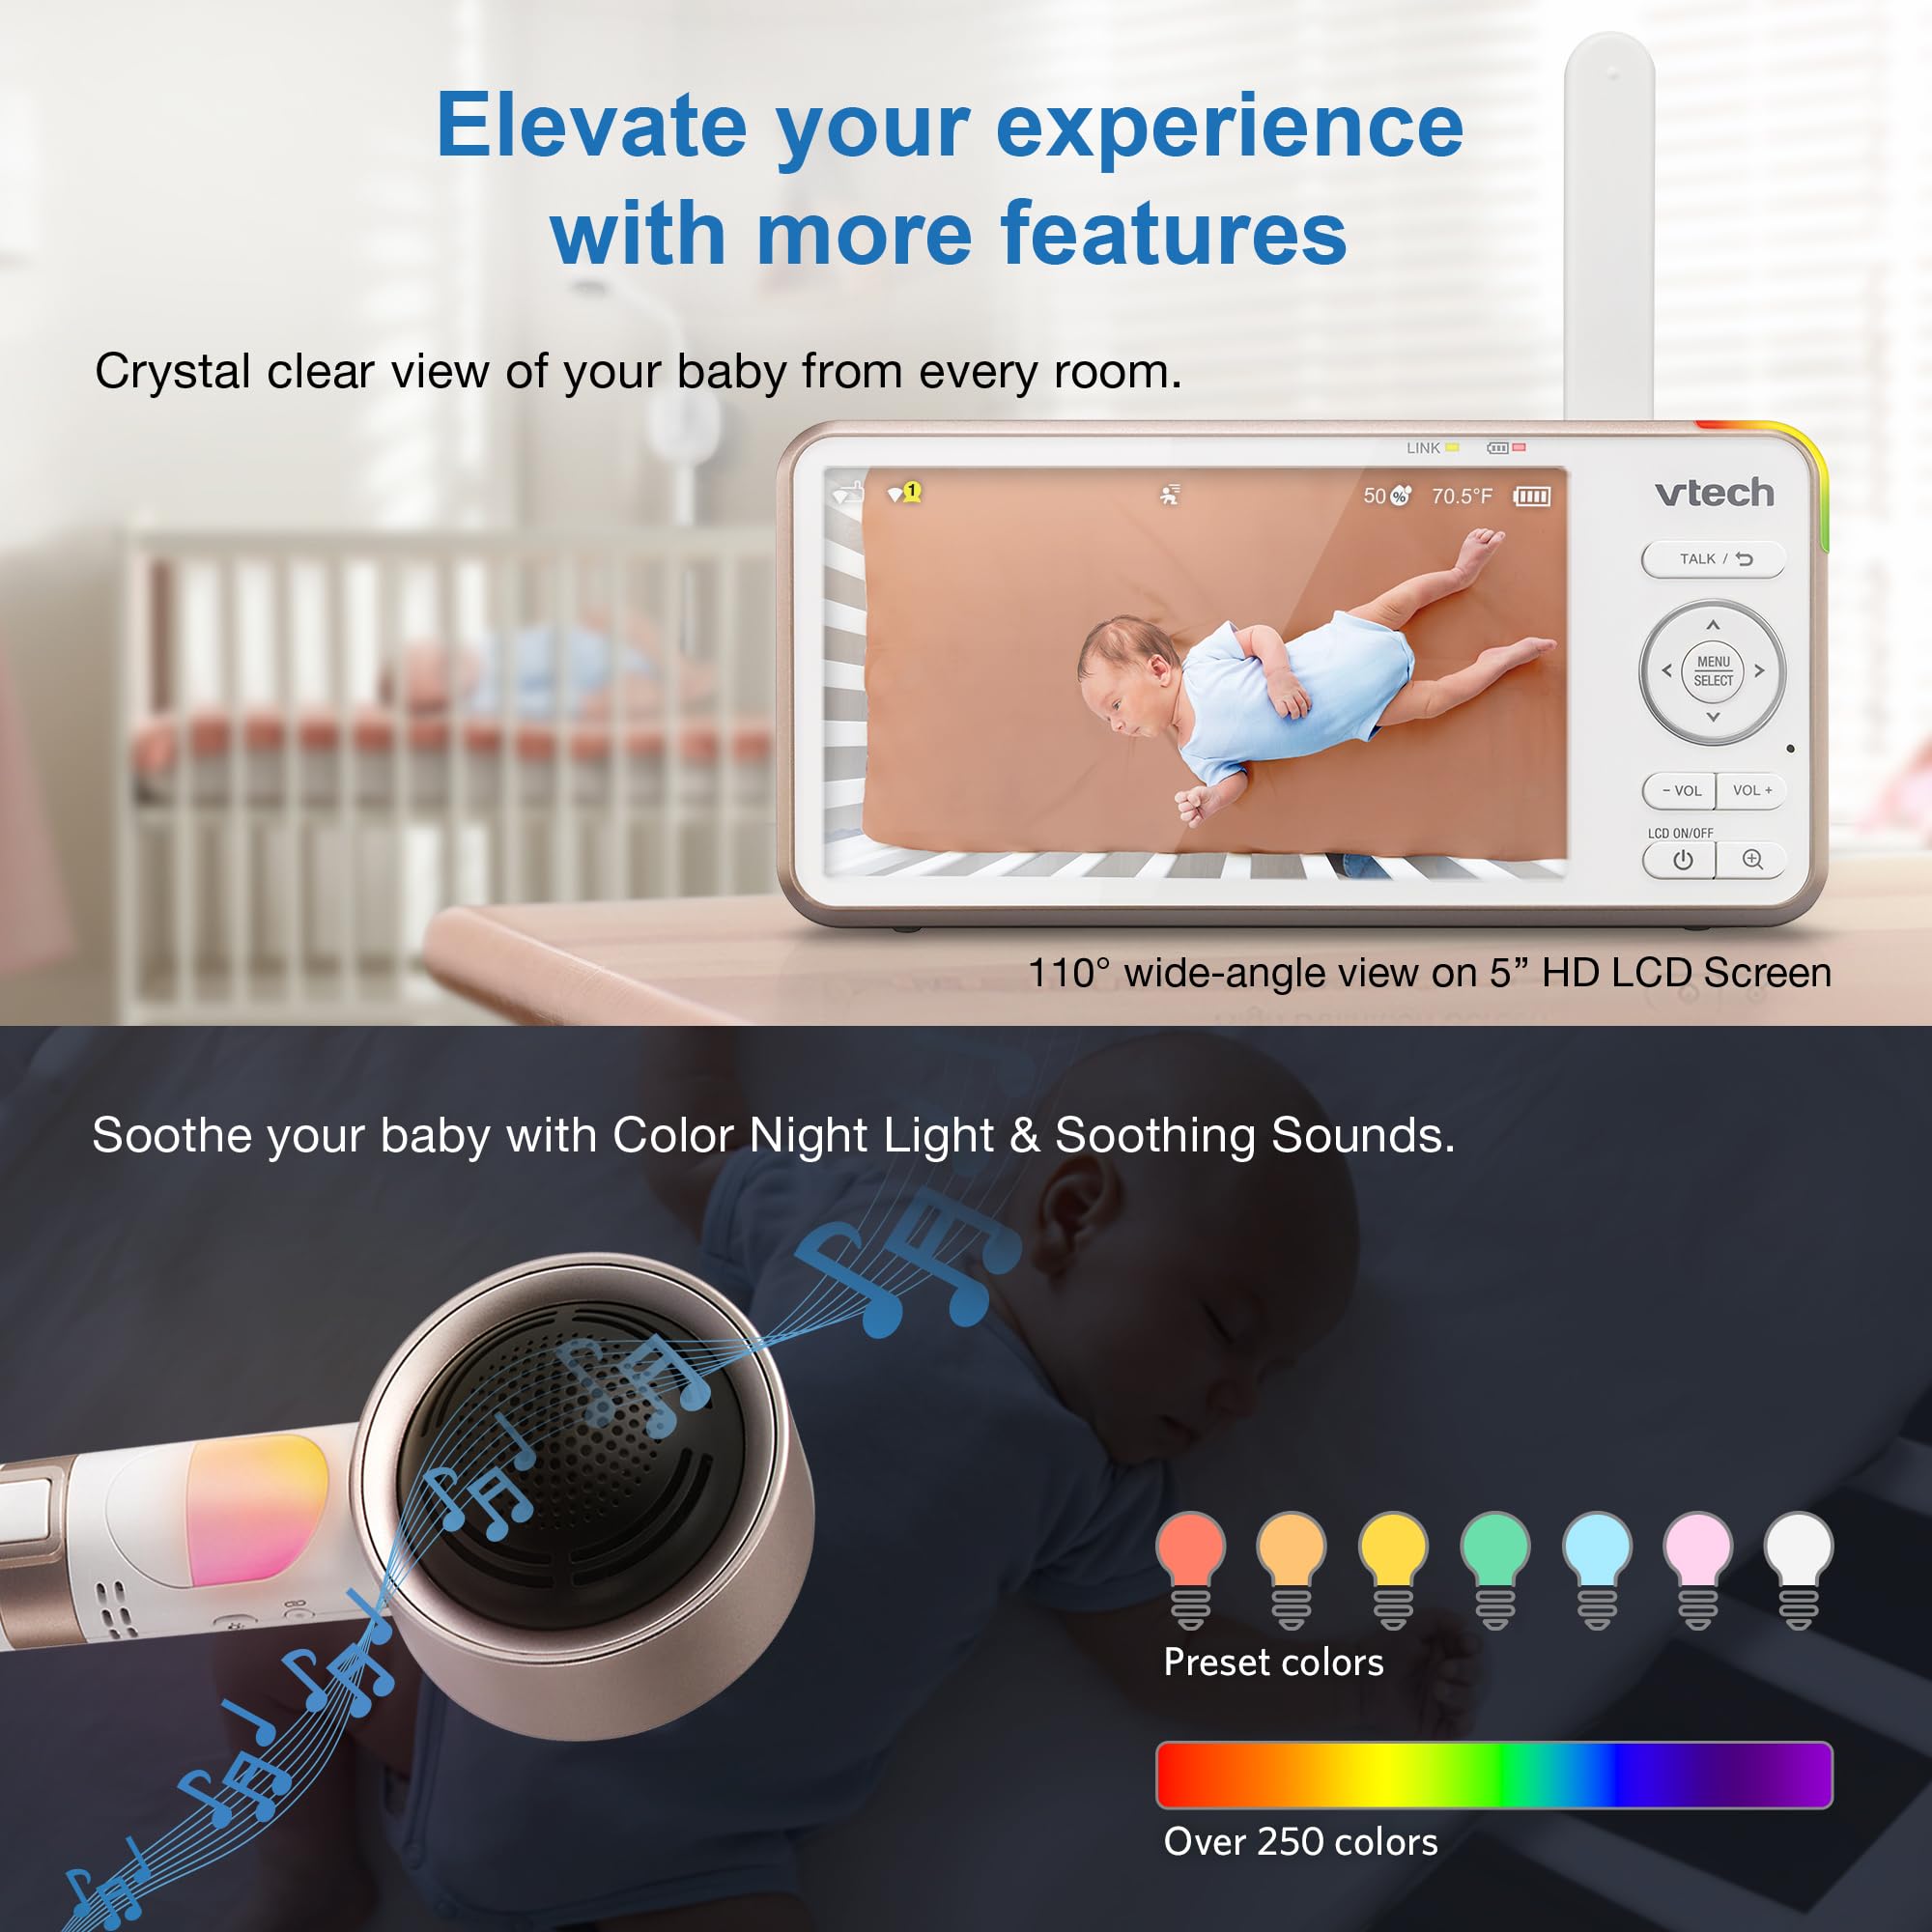 VTech VC2105 V-Care 1080p FHD Over-the-Crib Wifi Smart Baby Monitor with 5